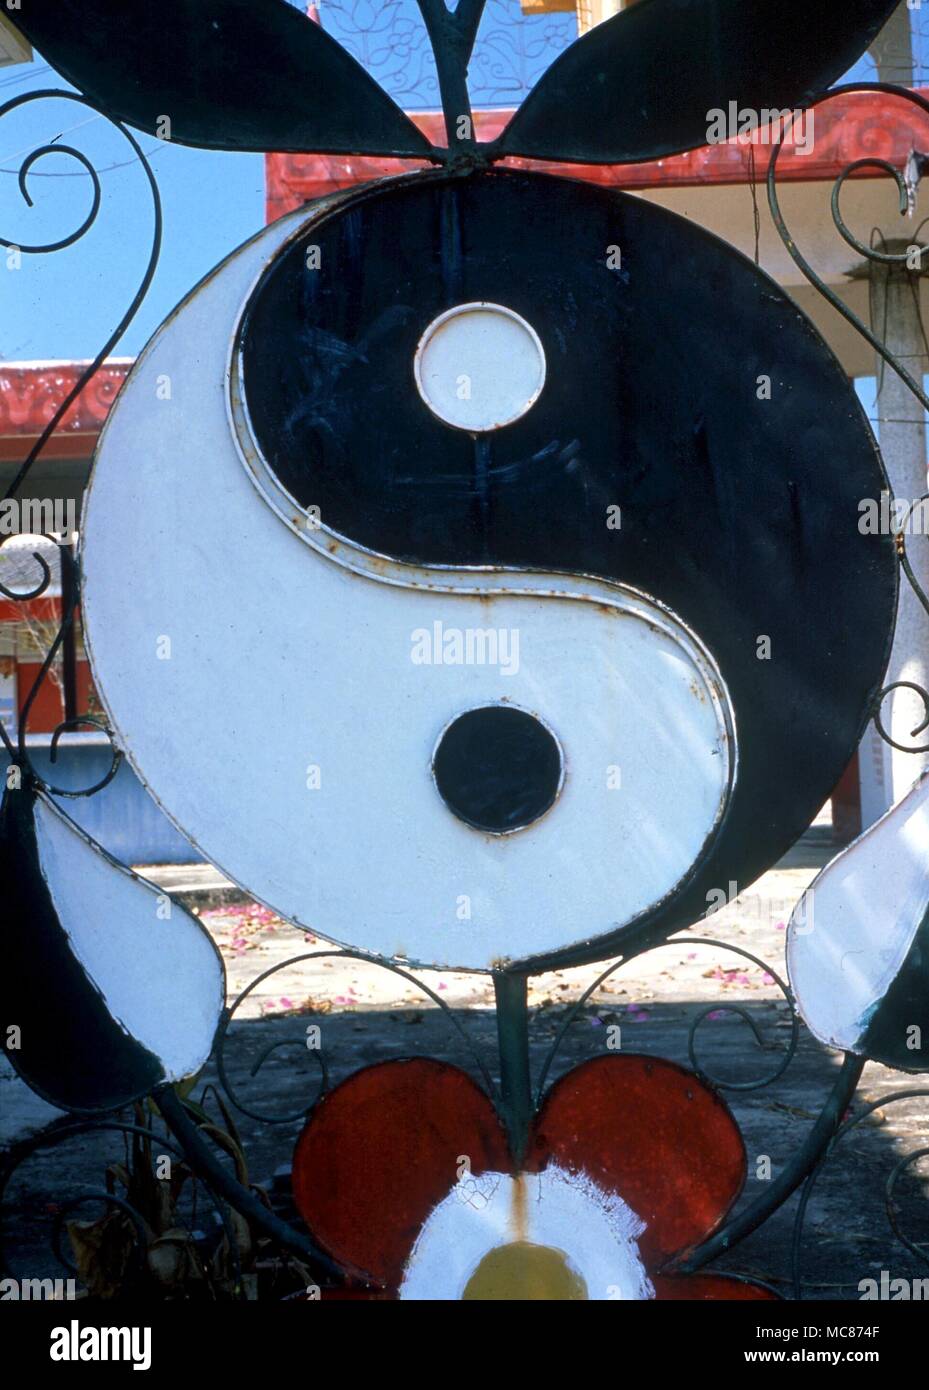 TAI CHI - The Tai Chi symbol which combines in one figure - the Yin (darkness) and the Yang (light). from a decorative Chinese gate, near Bangkok Stock Photo